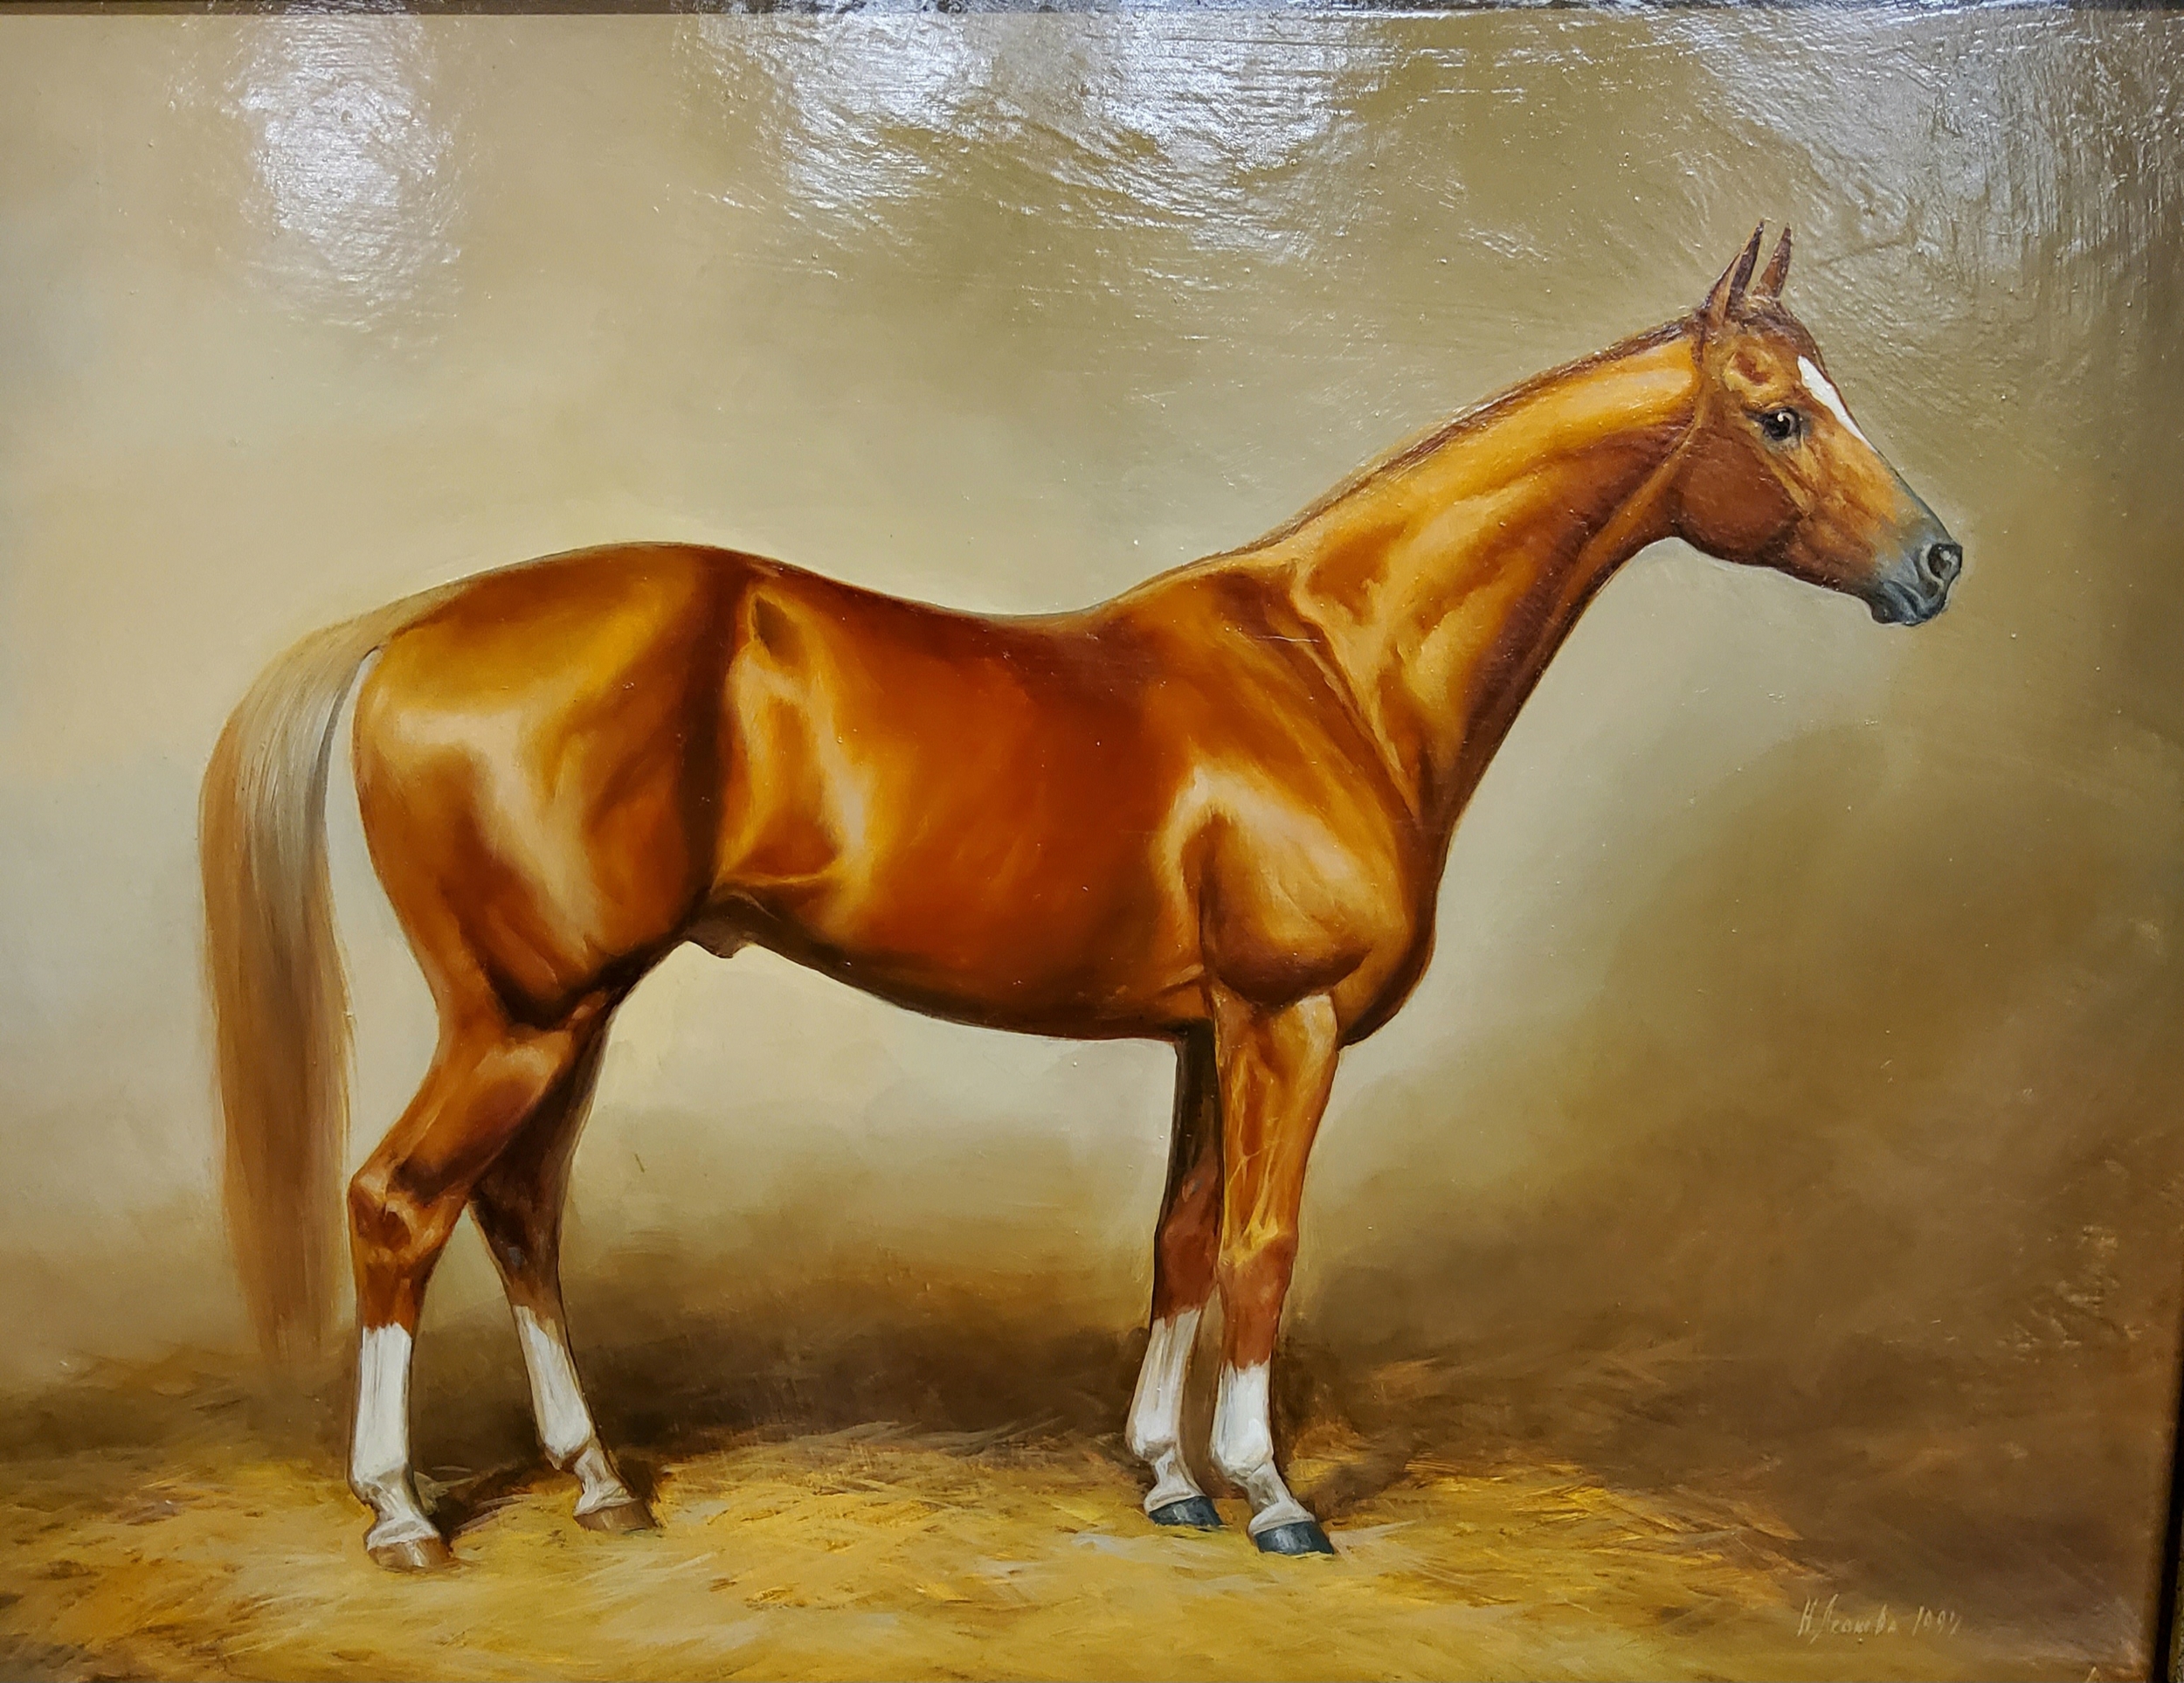 Natalie V. Leonova (Russian School) Thoroughbred Horse Conformation Study  Oil on panel, dated 1997, - Image 3 of 3